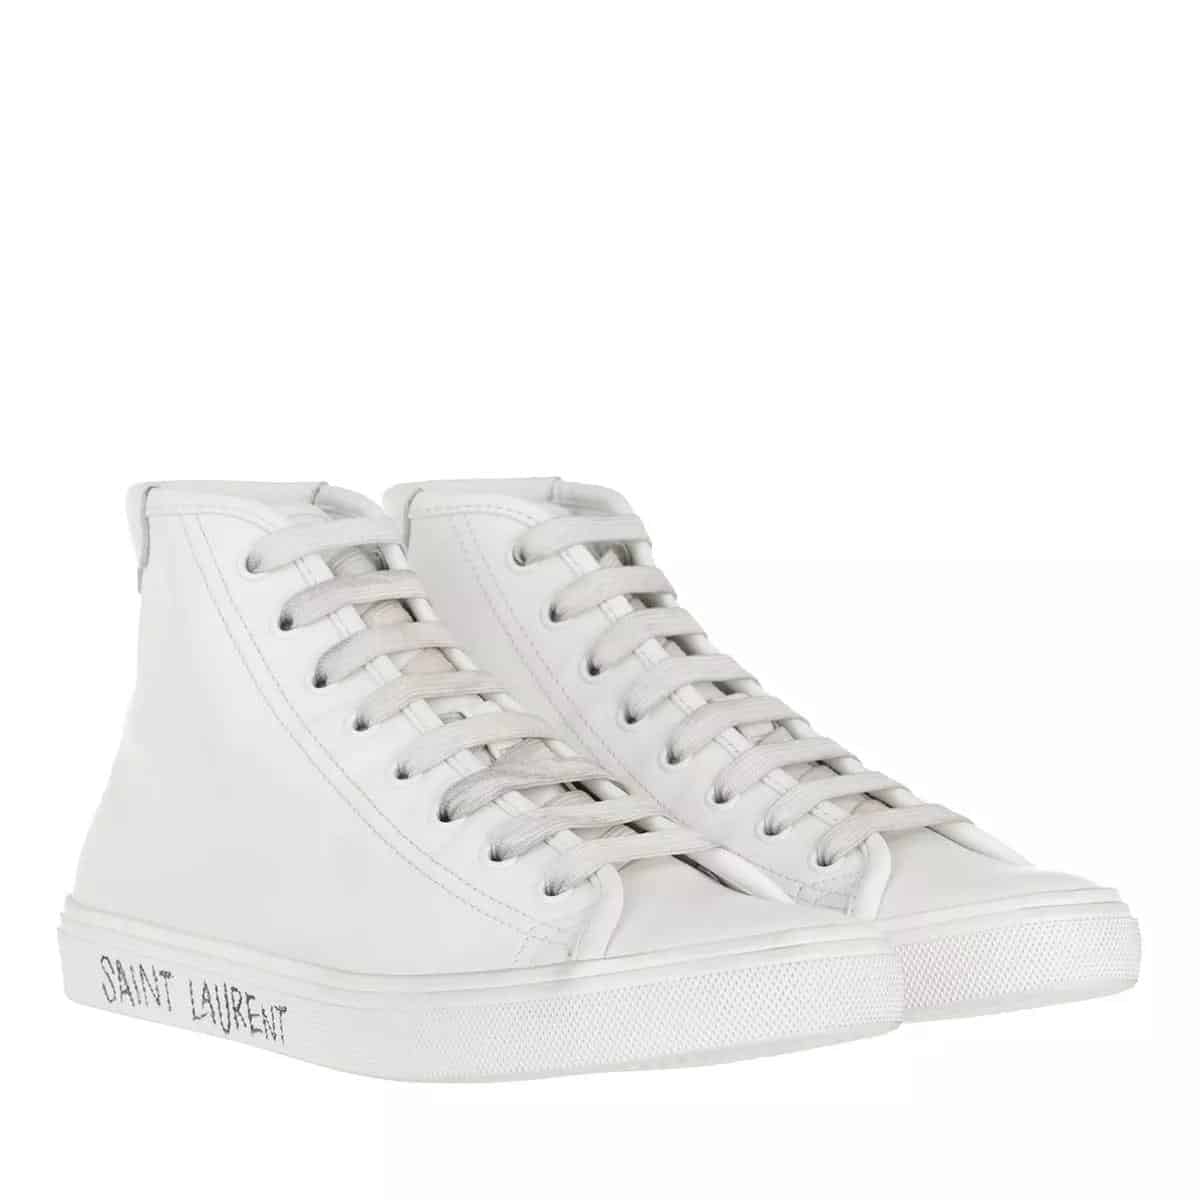 Saint Laurent Sneakers - Malibu Mid Top Sneakers Smooth Leather in wit